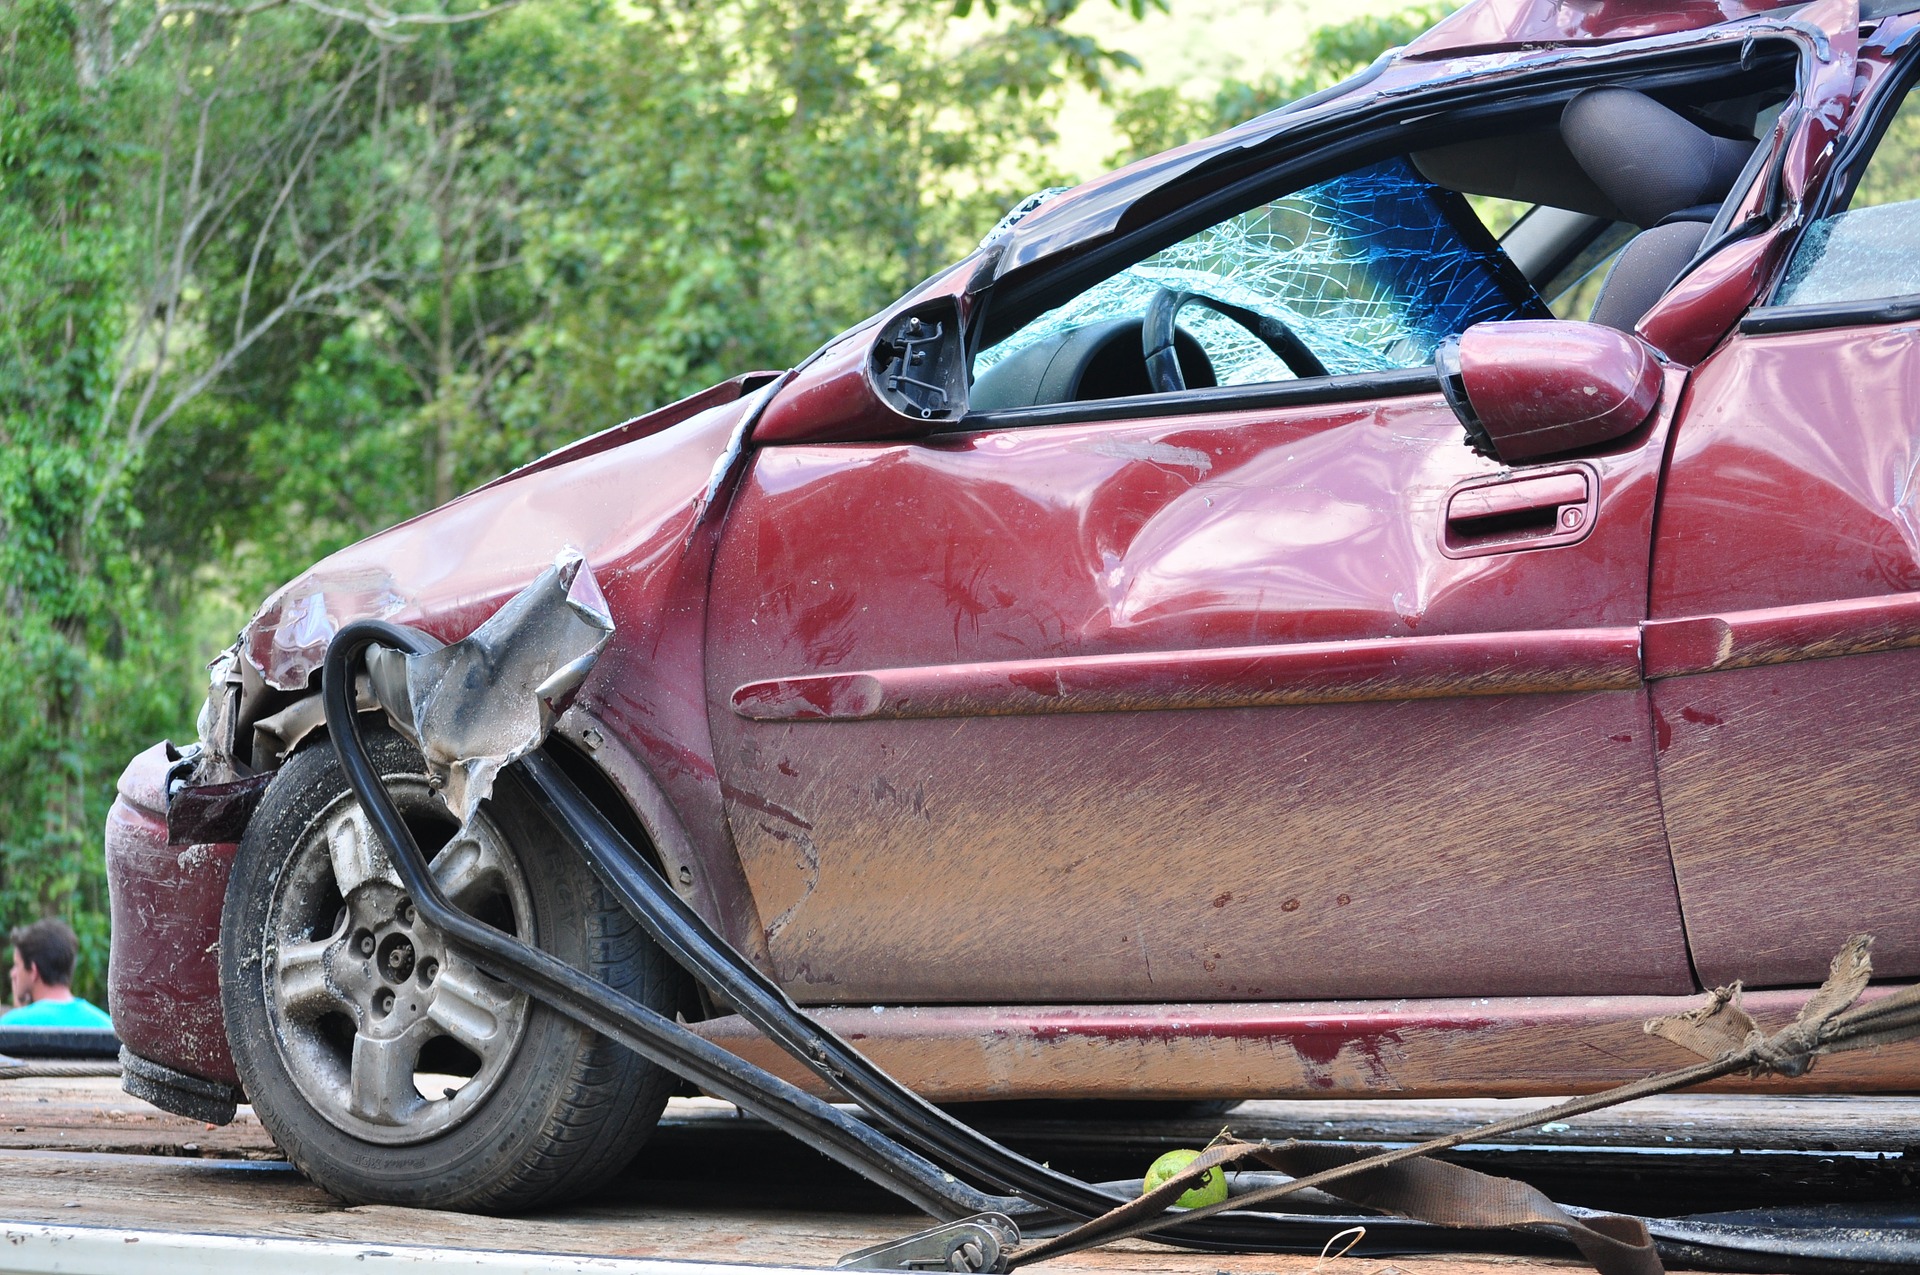 Rollover Accidents: Can It Happen to Me? | The Law Offices of Anthony Carbone